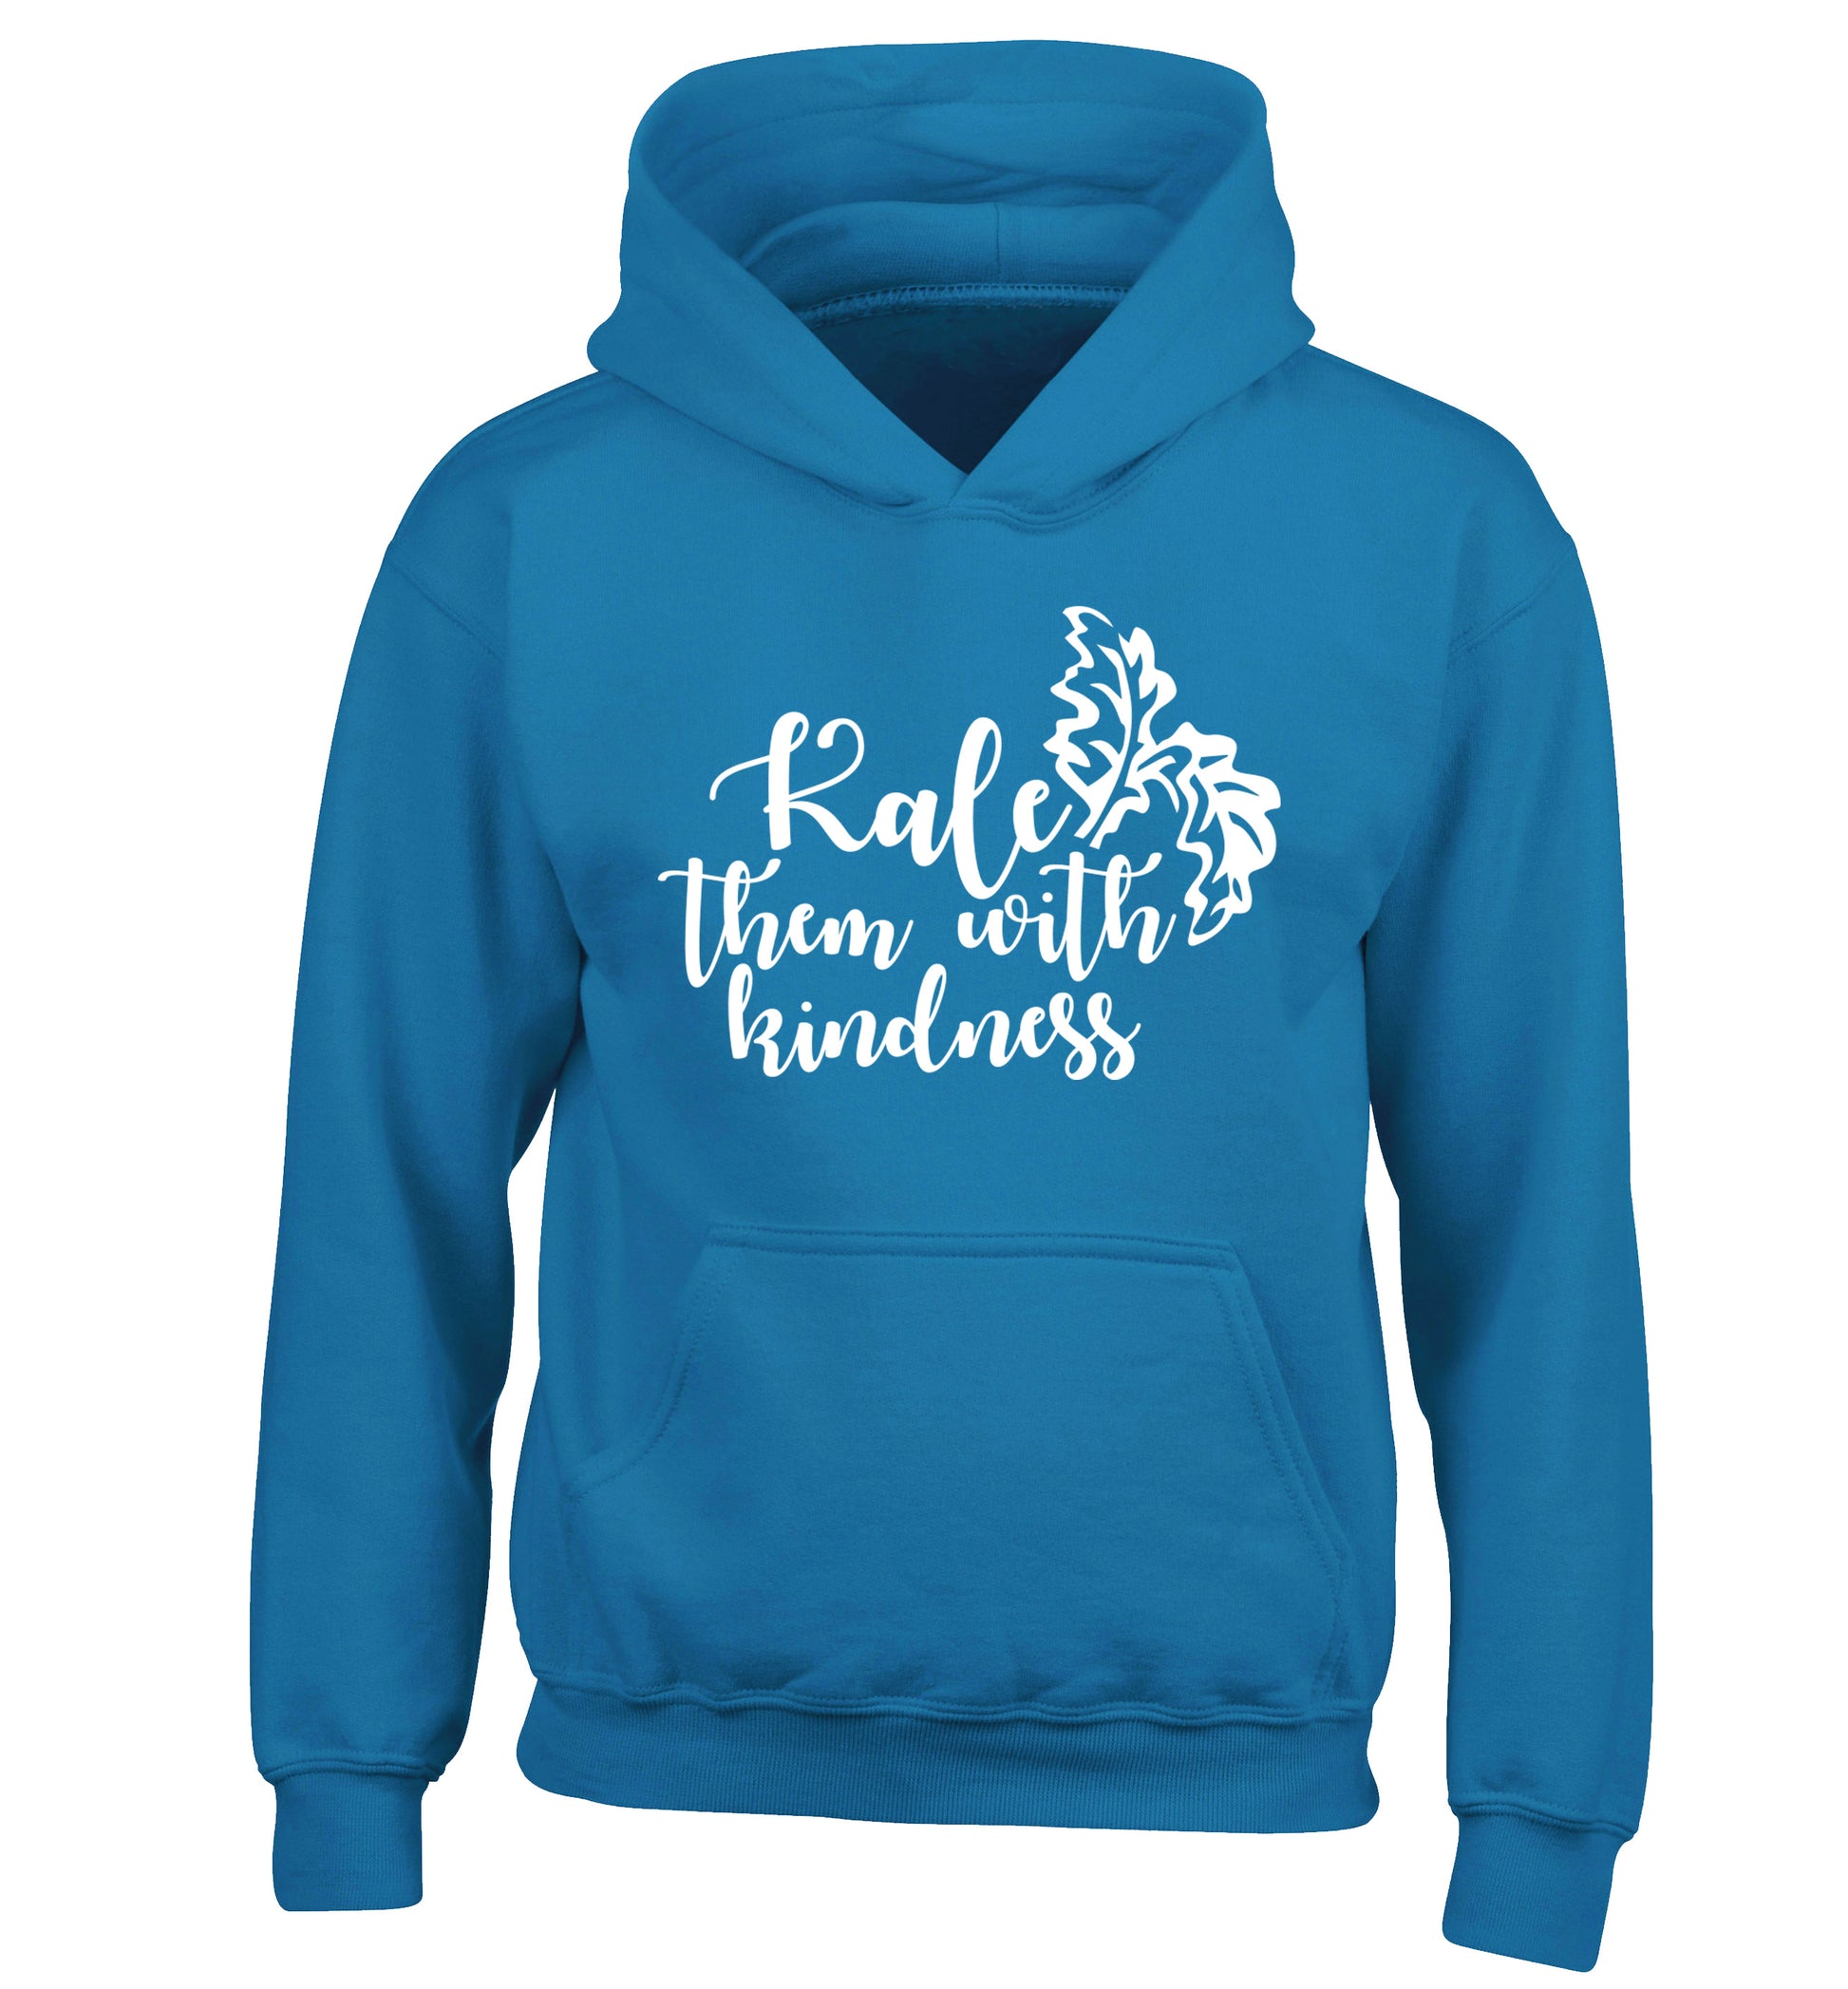 Kale them with kindness children's blue hoodie 12-14 Years